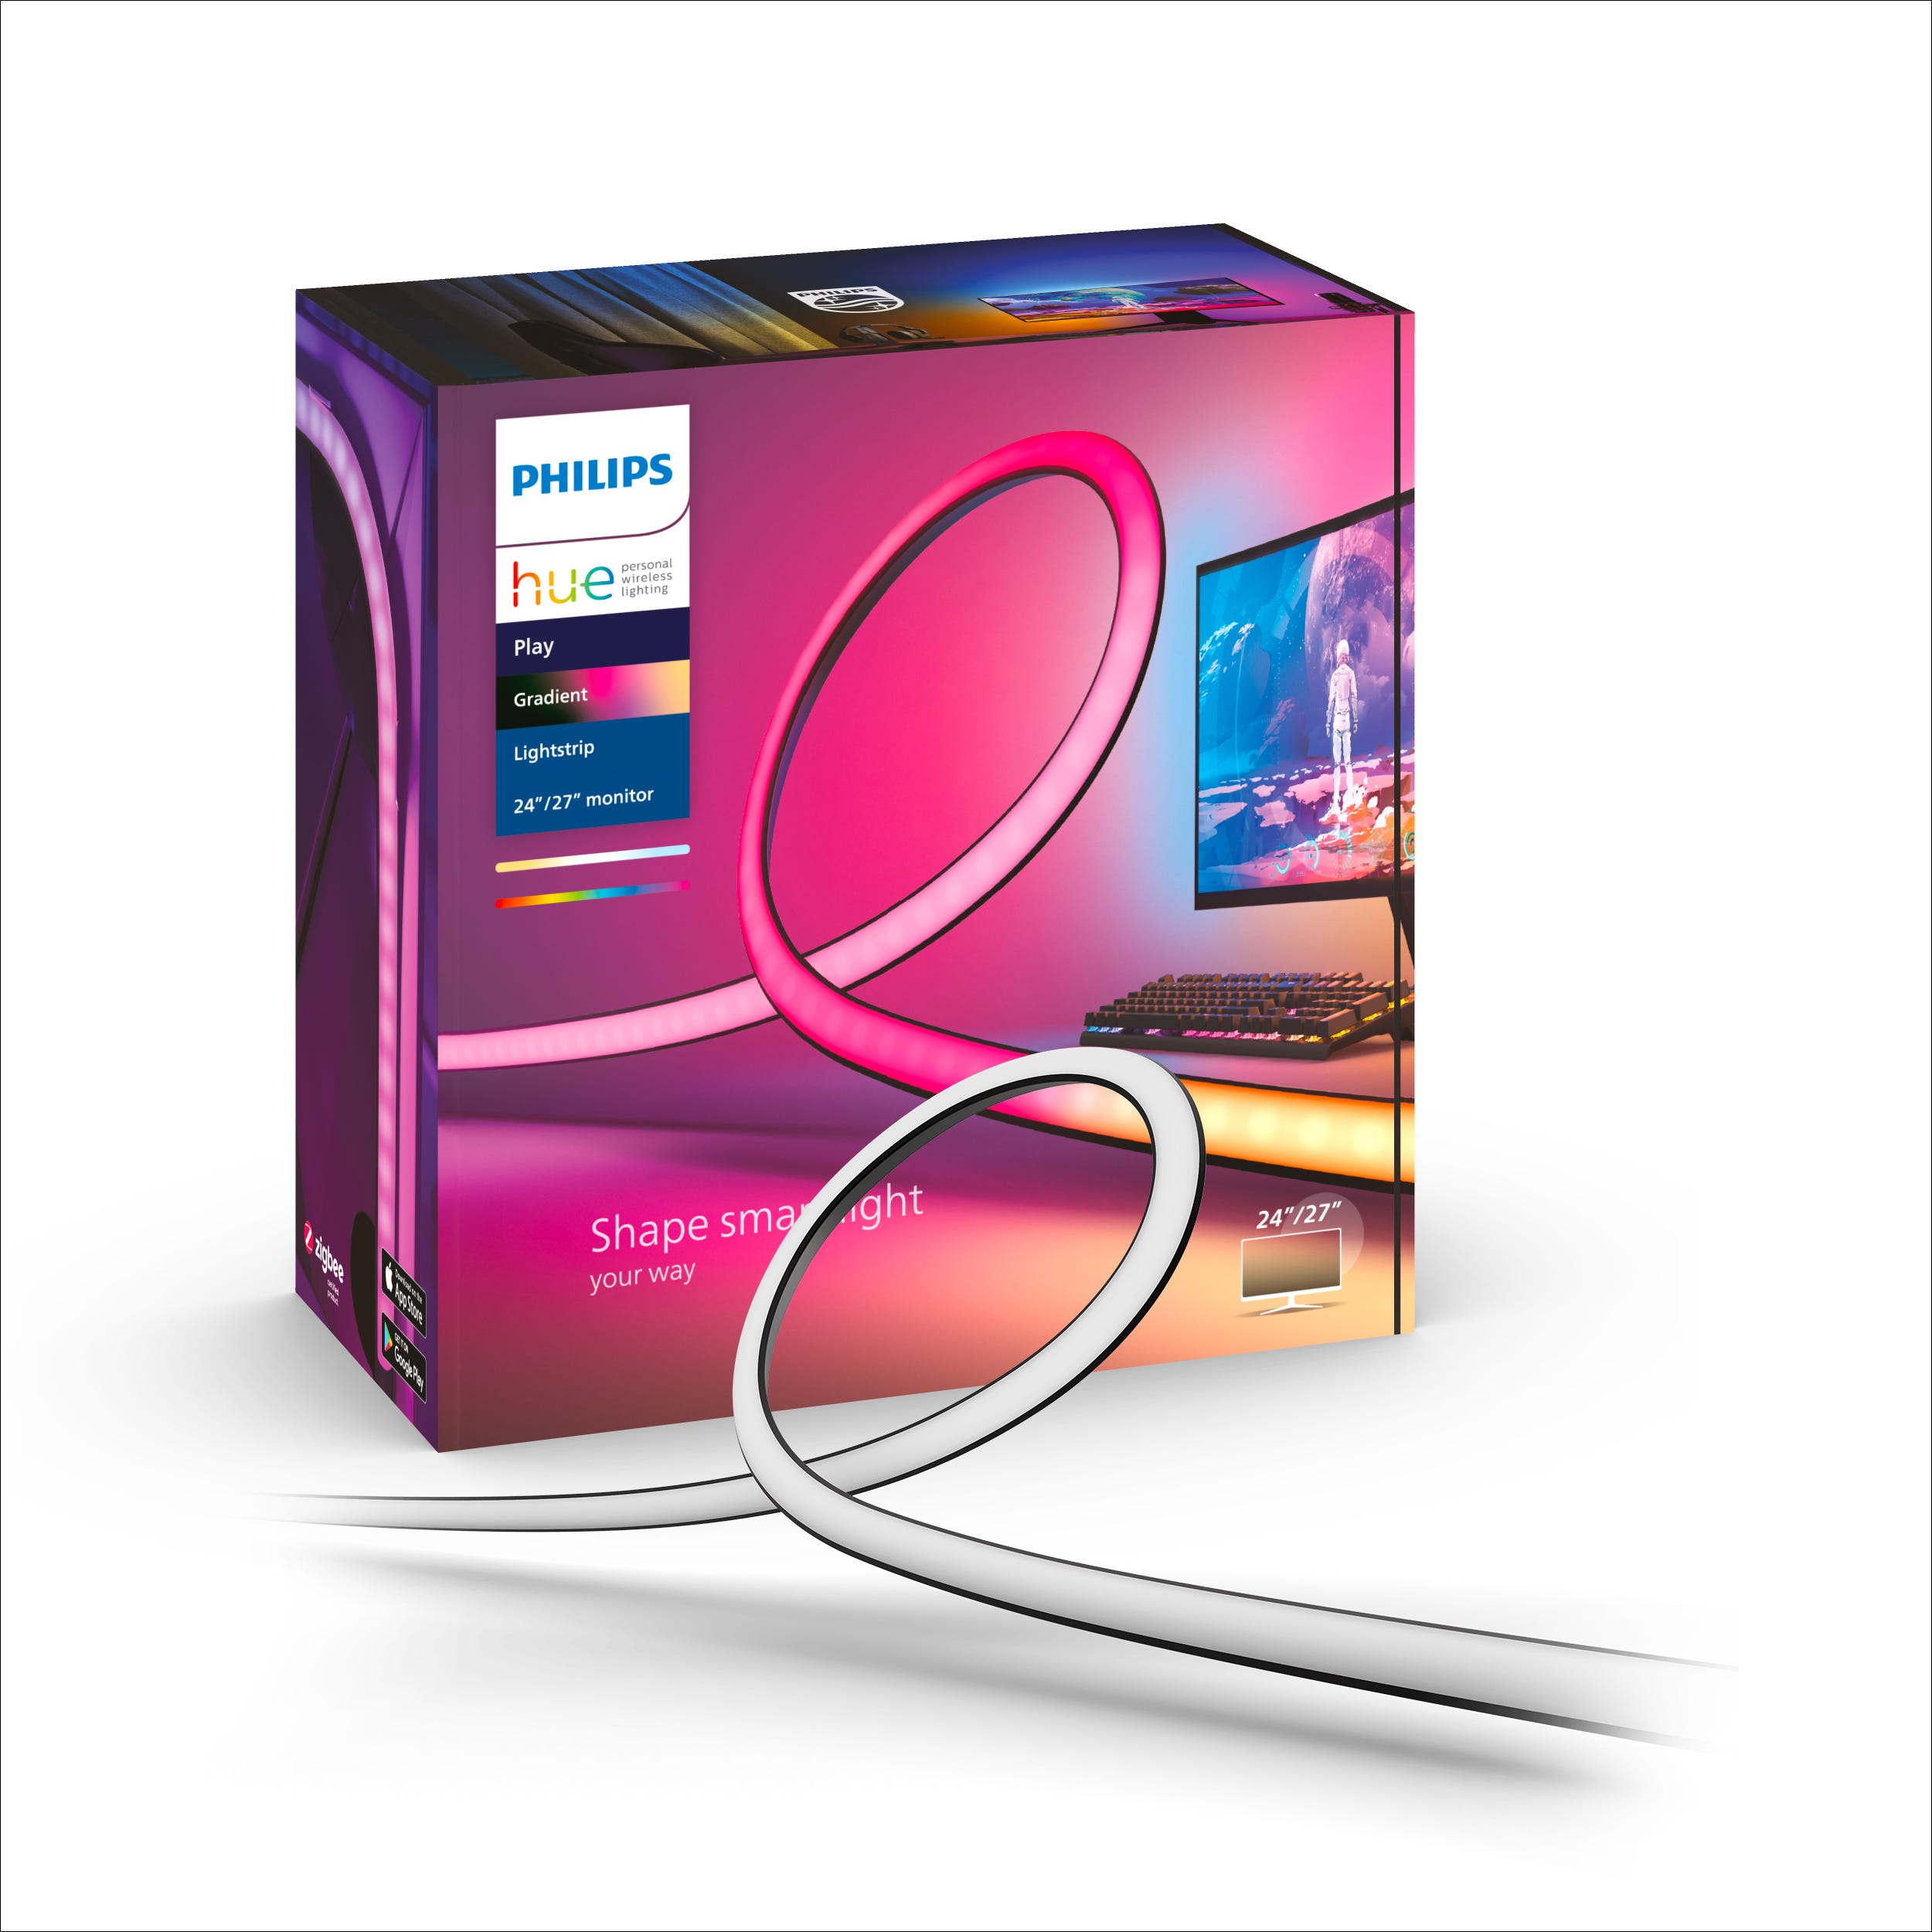 Philips-Hue-Play-gradient-Lightstrip-for-PC-product